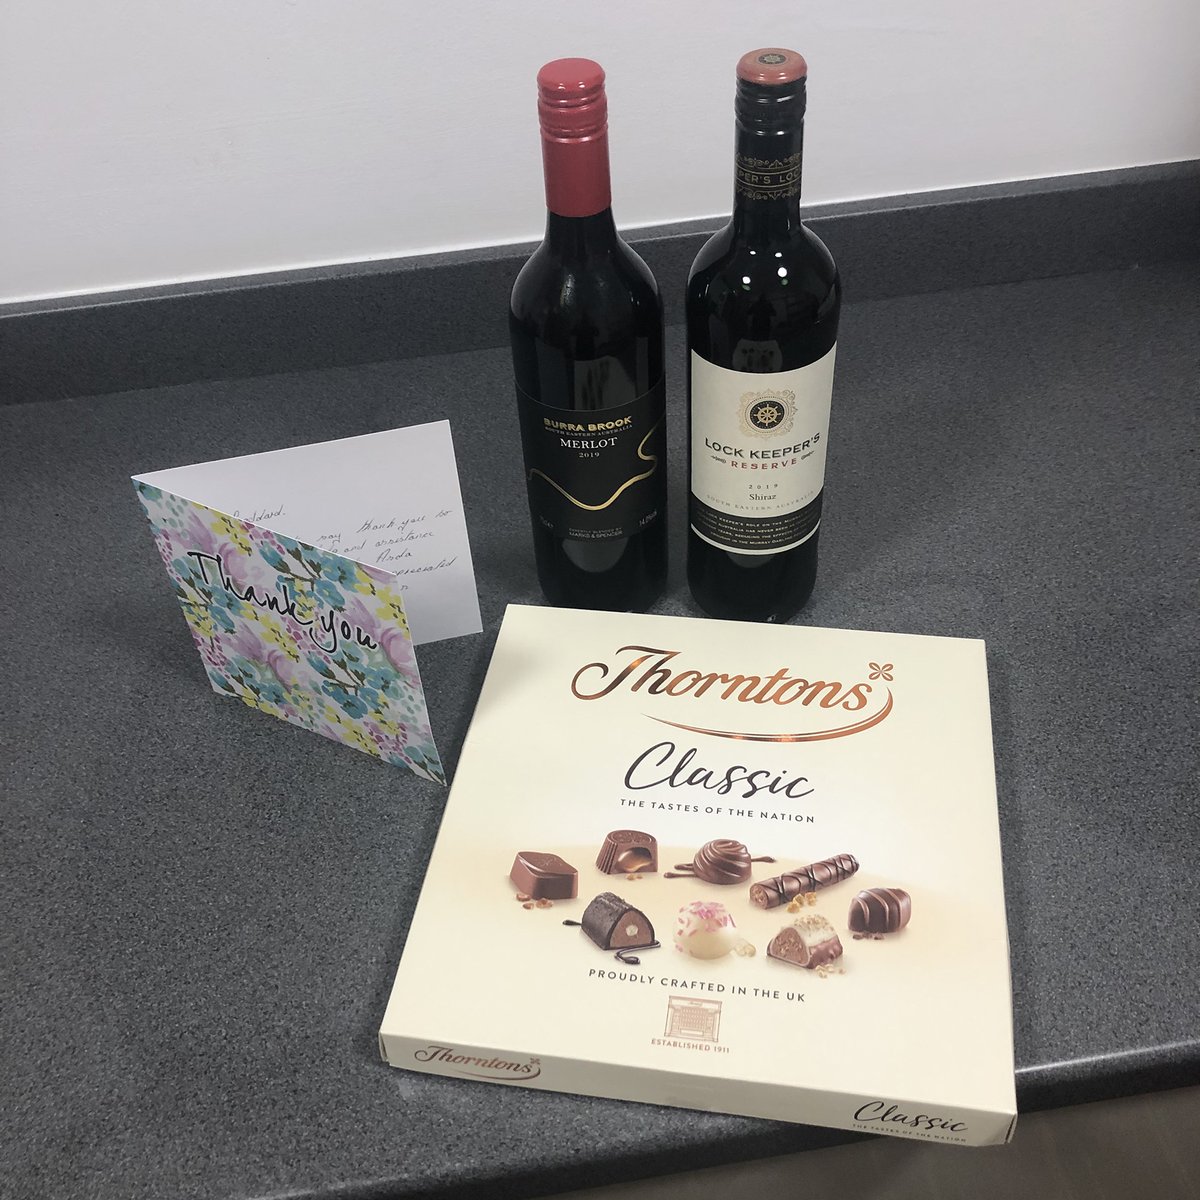 A lovely way to start the week getting feedback from our clients, especially when it’s chocolates and wine #happyclient 

#lawfirm #prescription #dispensingerror #medicalnegligence #wrongmedication #pharmacy #clinicalnegligence #medicalnegligencesolicitors #medicalnegligencelaw